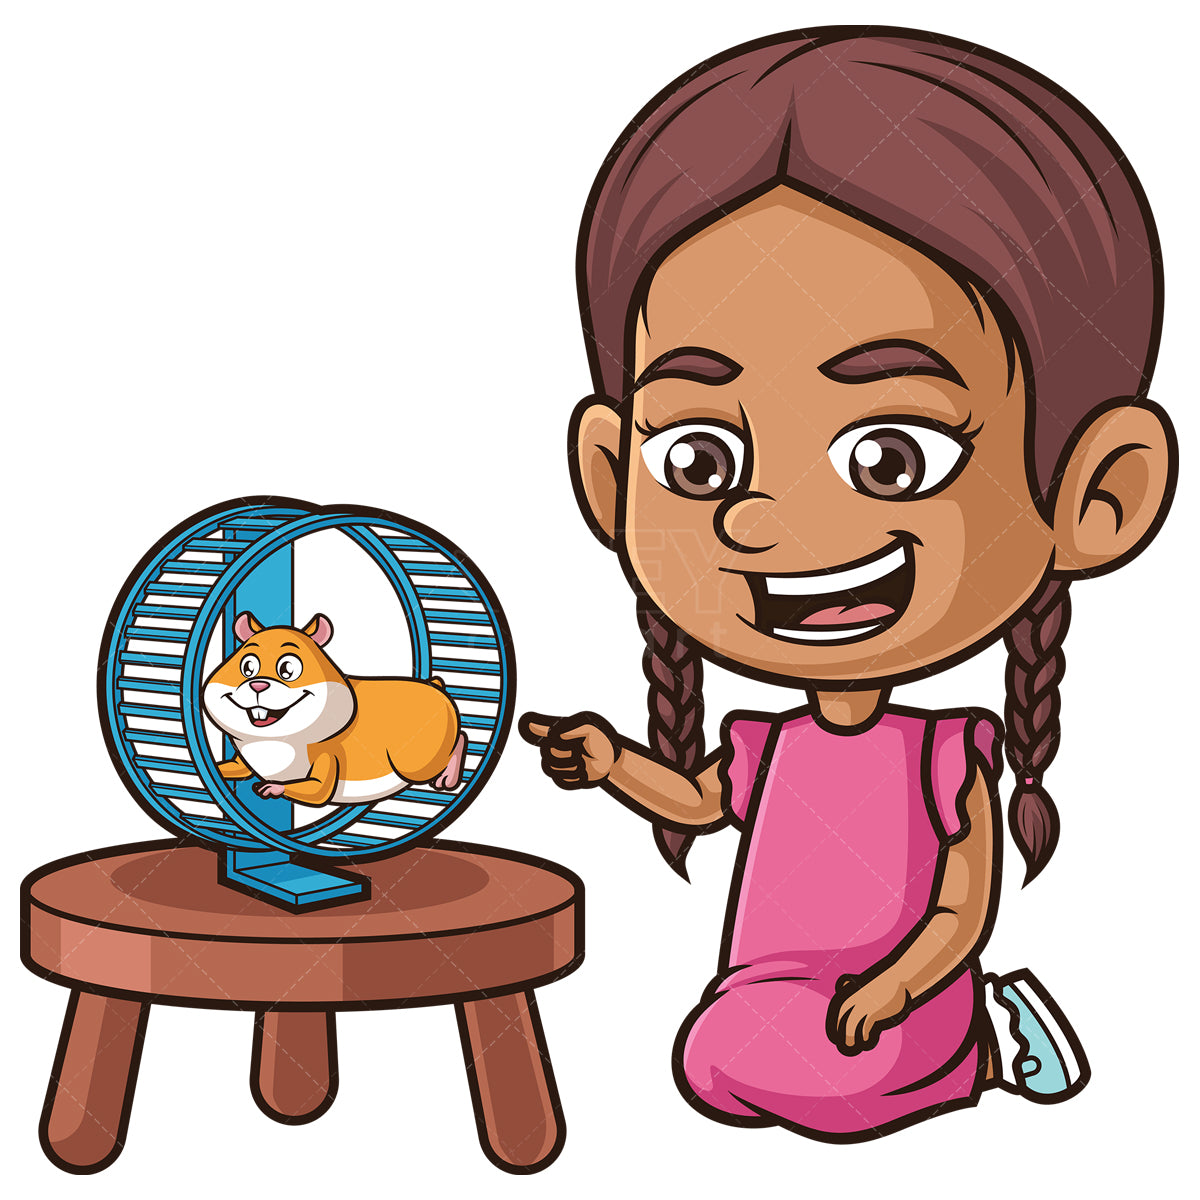 Royalty-free stock vector illustration of a hispanic girl watching her hamster.